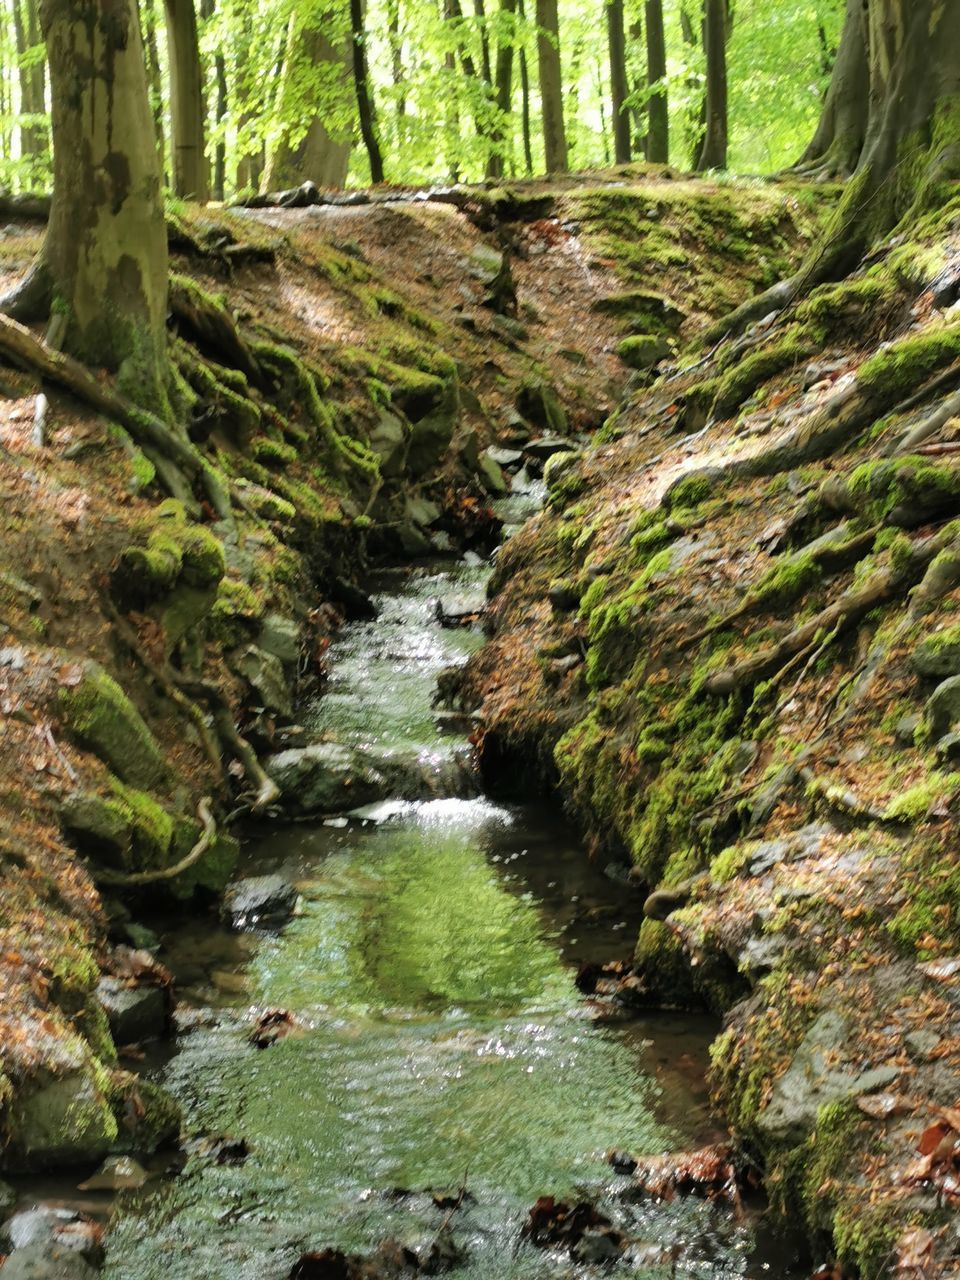 STREAM FLOWING AMIDST ROCKS IN FOREST